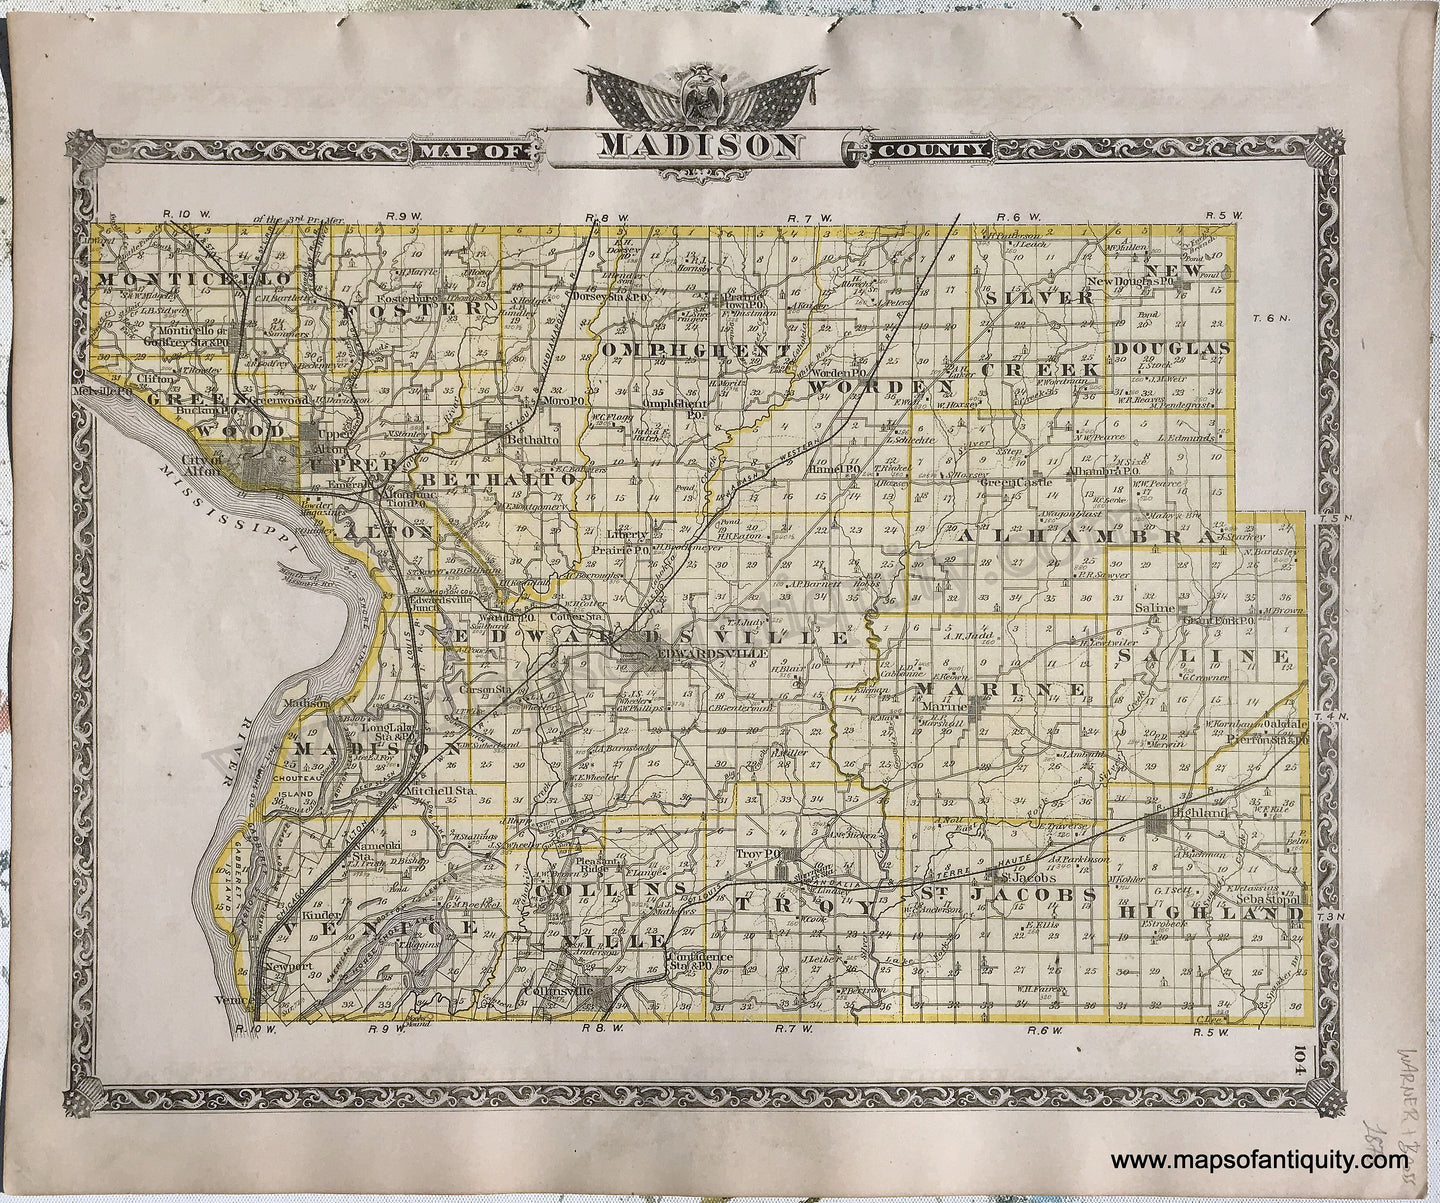 Antique-Hand-Colored-Map-Madison-County;-verso:-Bond-County-Illinois-1876-Warner-&-Beers-/-Union-Atlas-Co.-Midwest-1800s-19th-century-Maps-of-Antiquity